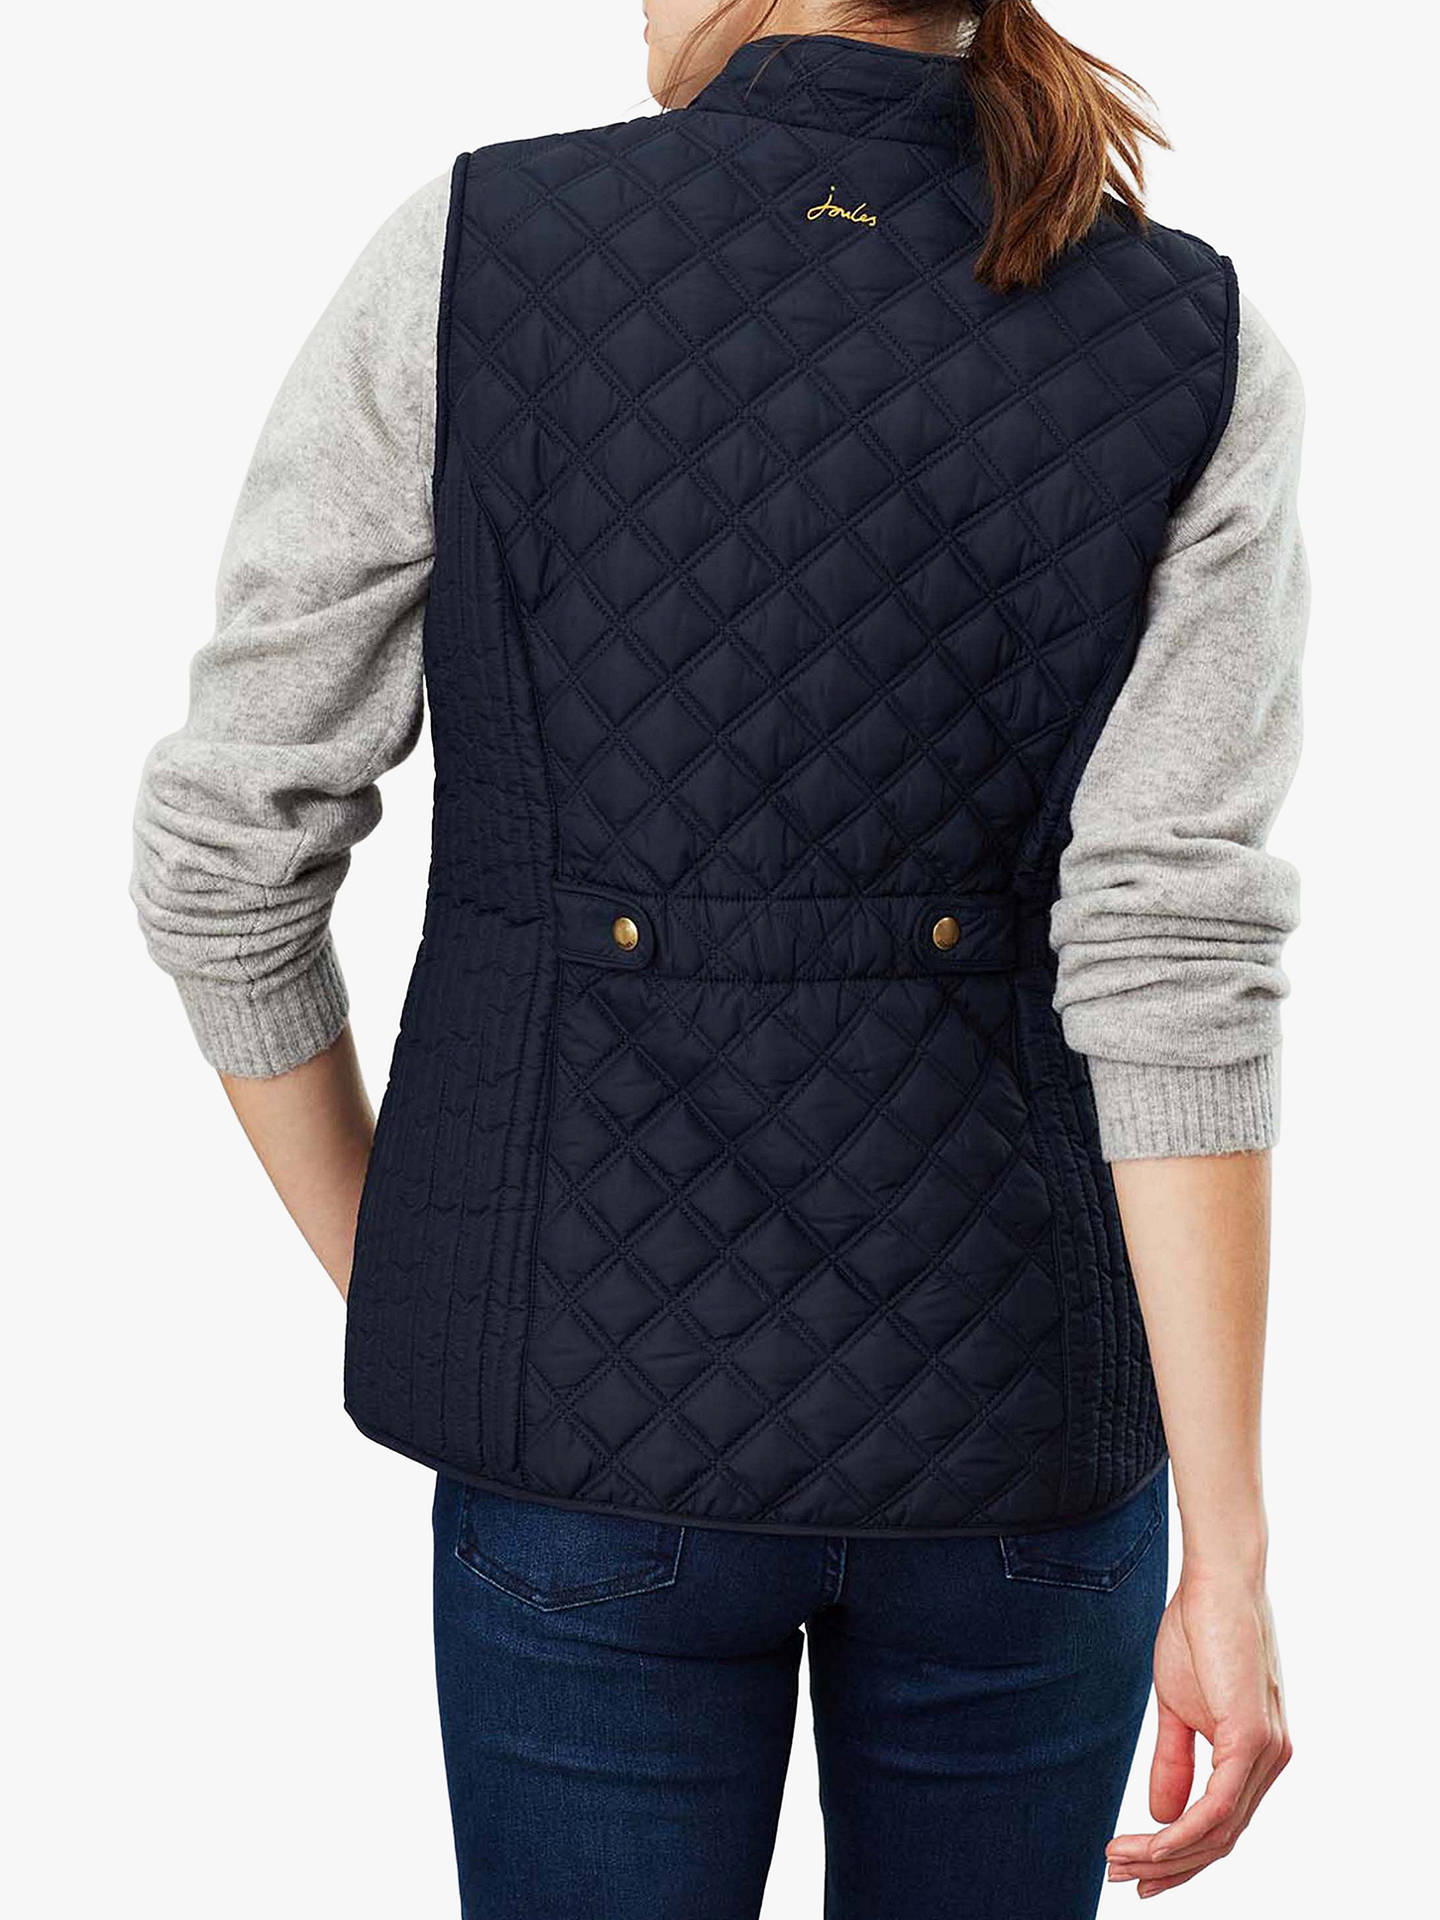 Joules Minx Quilted Gilet | Marine Navy at John Lewis & Partners